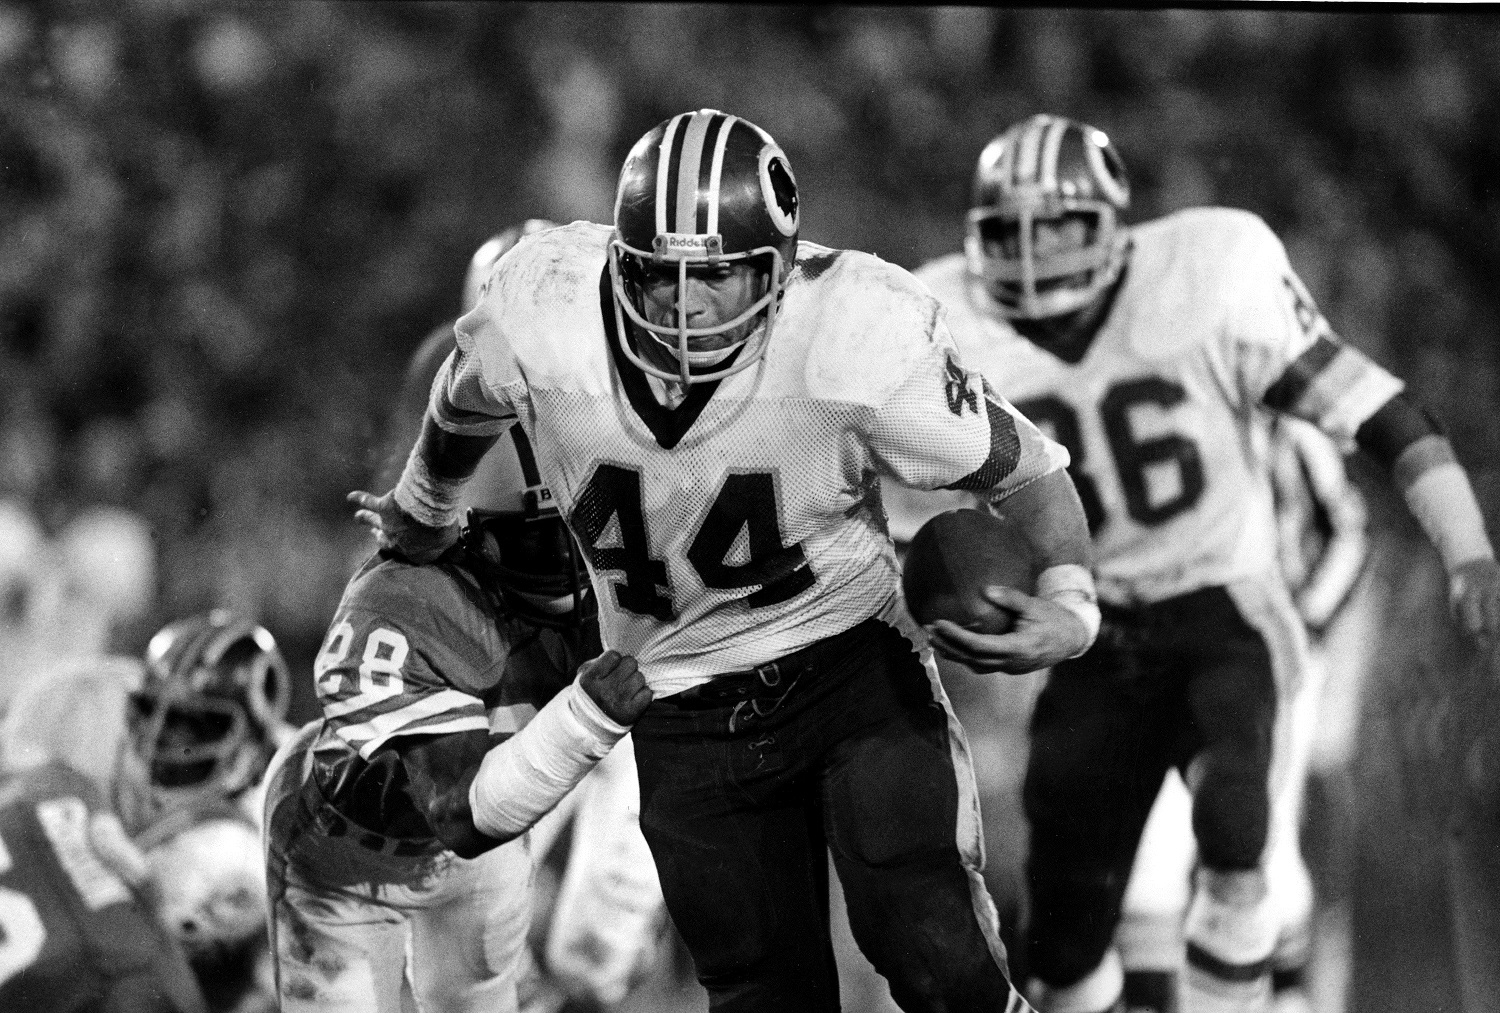 FILE -- This is a Jan. 30, 1983, file photo showing Washington Redskins running back John Riggins (44) eluding a tackle by Don McNeal (28), of the Miami Dolphins,  during Super Bowl XVII at the Rose Bowl in Pasadena, Calif. Clinton Portis is trying to be a bit more low key this year. Still, the Washington Redskins running back couldn't help but take a shot or two at the great John Riggins, whose franchise record Portis could break this year. (AP Photo/File)